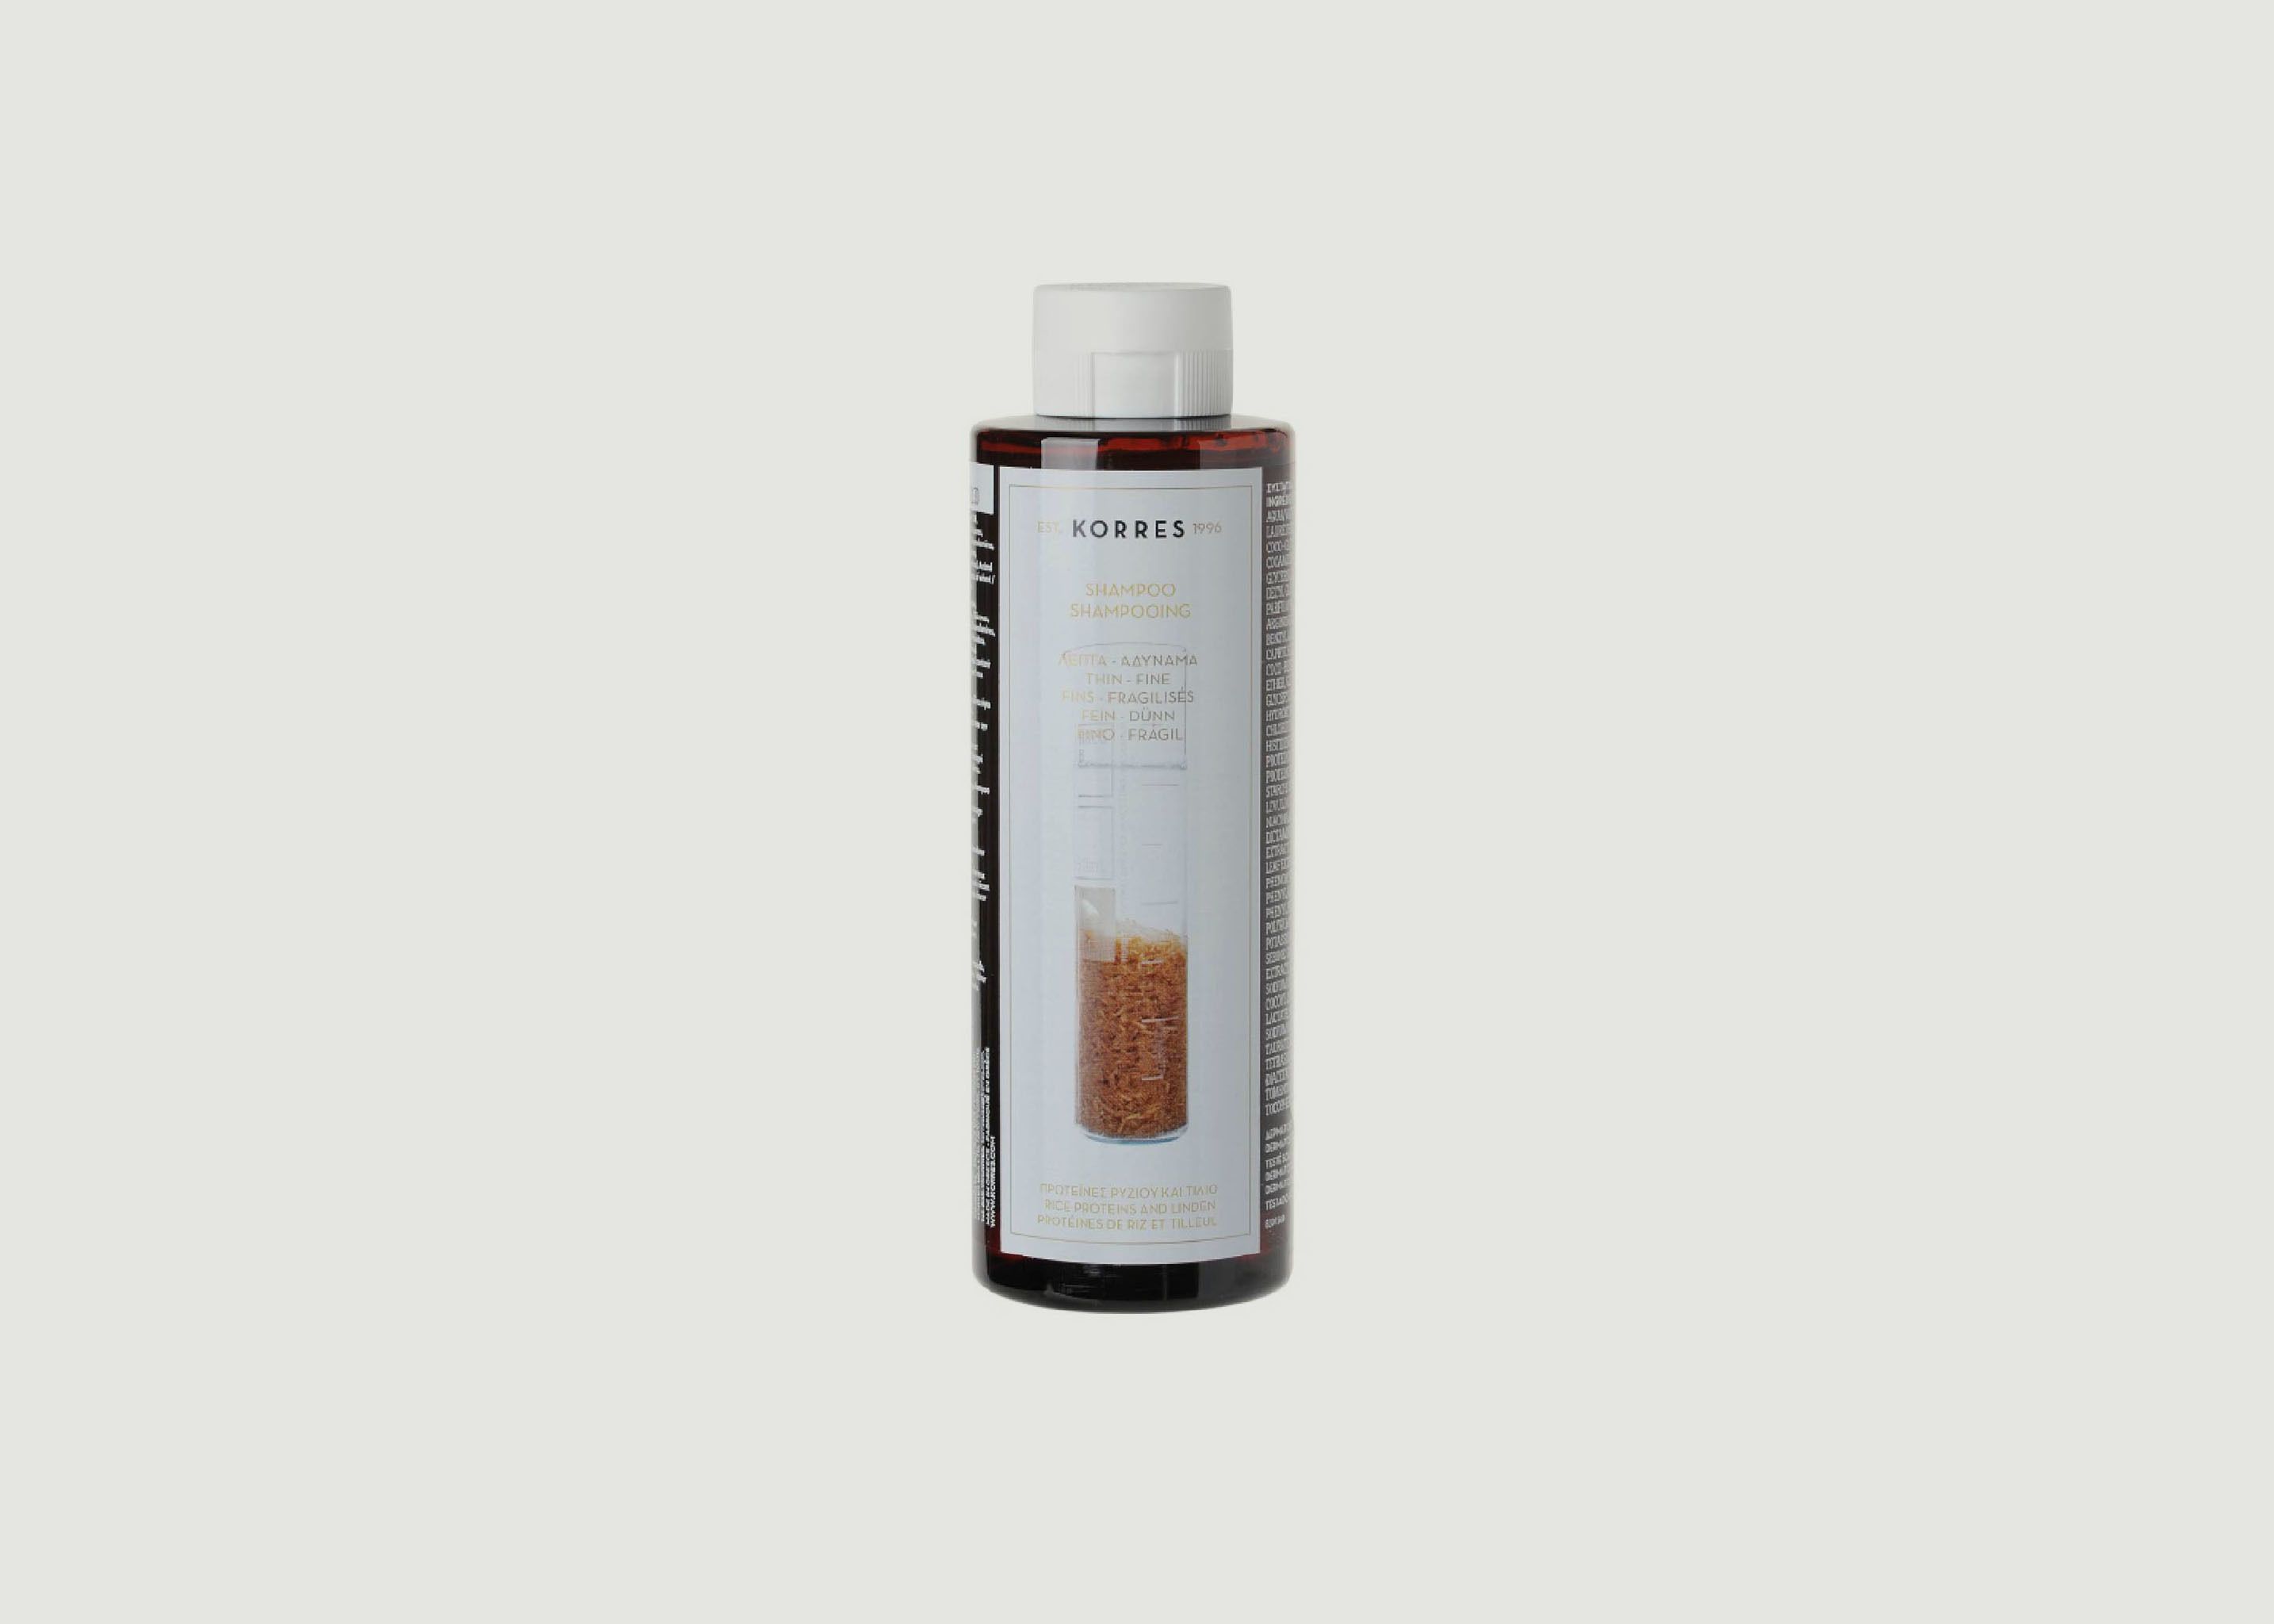 Shampoo fine hair without volume - rice protein - Korres